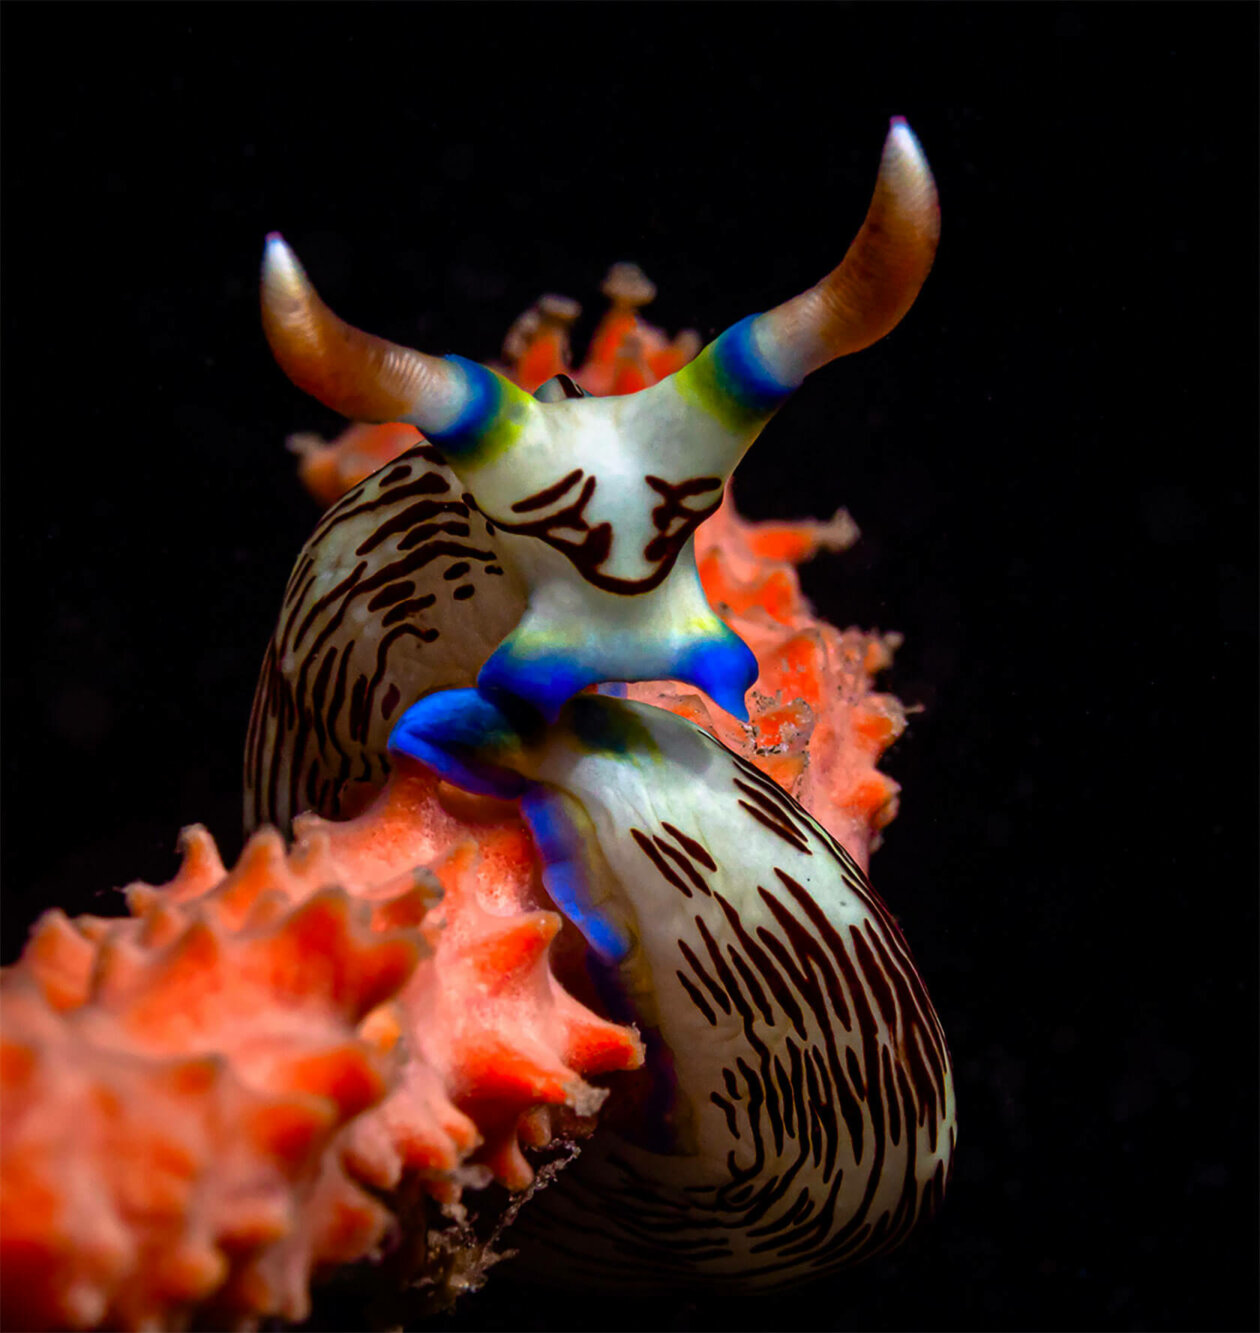 Nudibranchs Gorgeous Pictures Of Sea Slugs By Andrey Savin 7